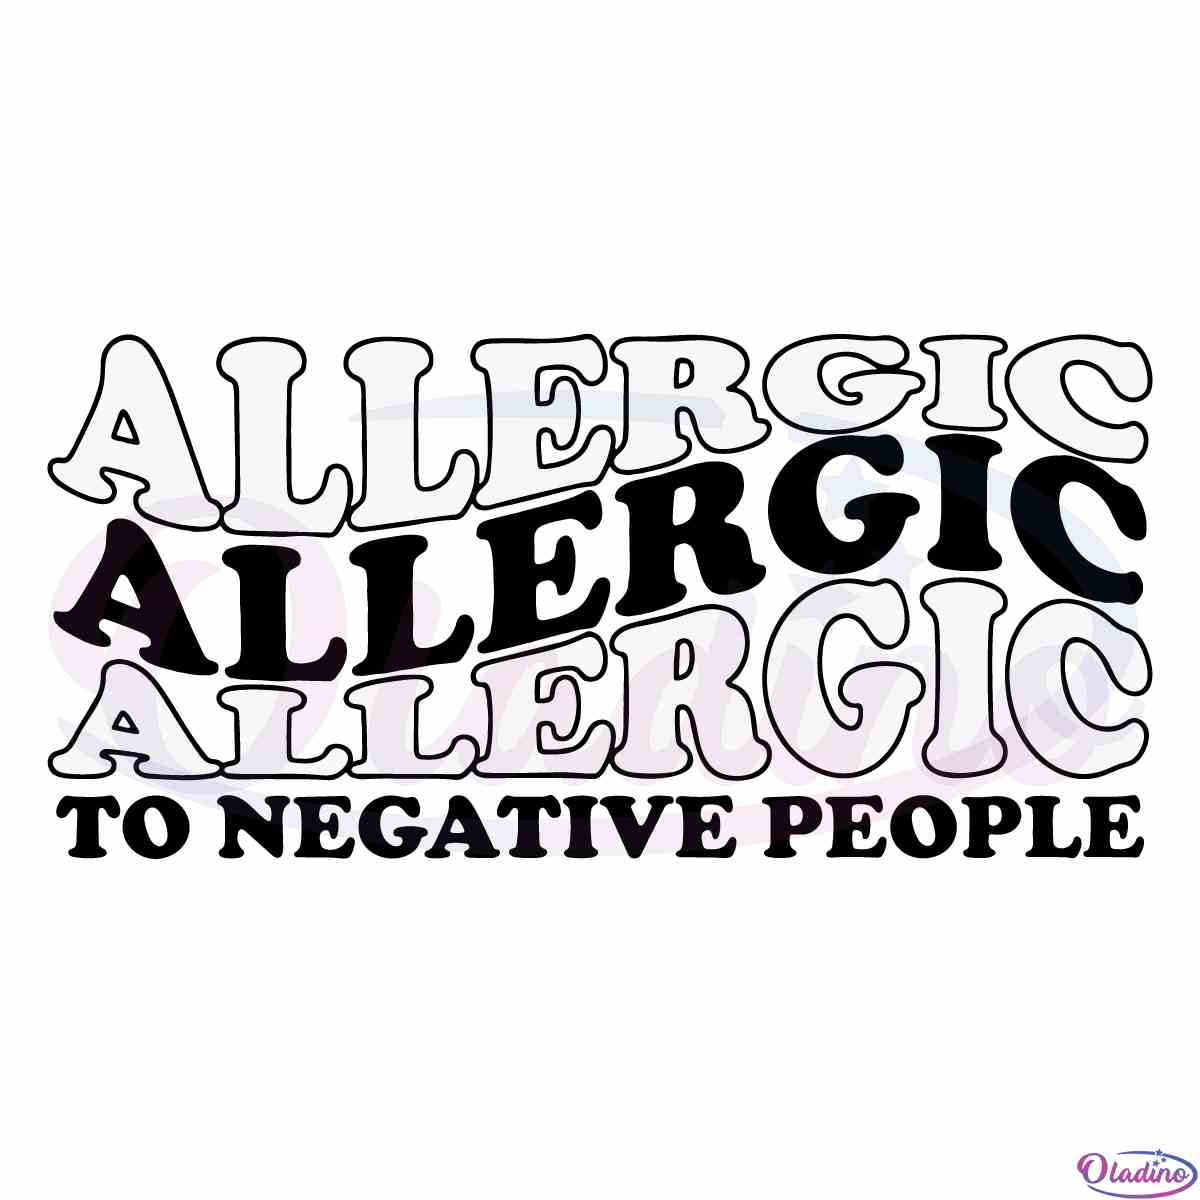 funny-allergic-to-negative-people-svg-cutting-file